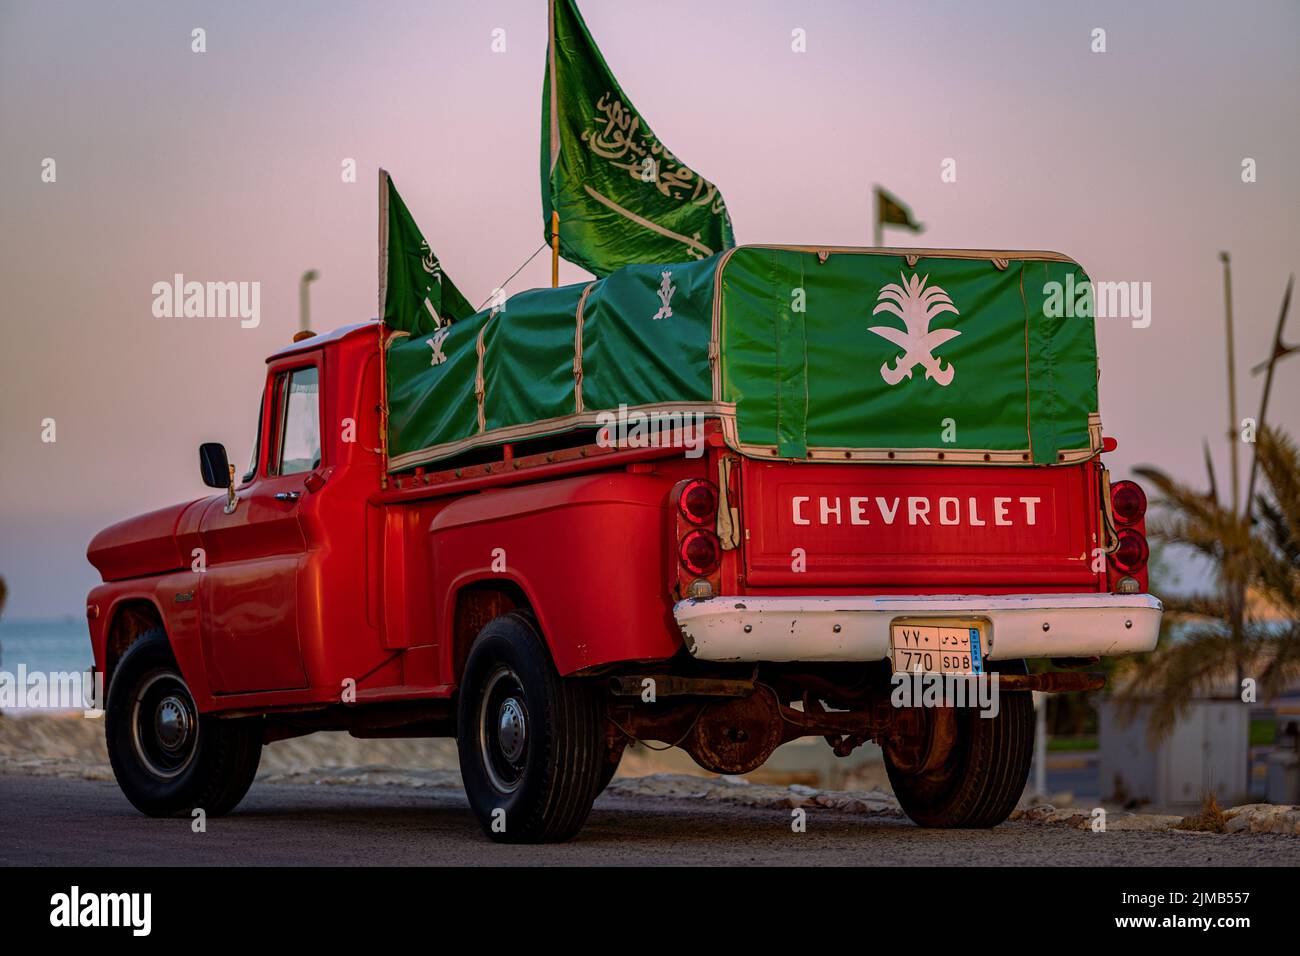 A red Chevrolet pickup car with National Day flags in Saudi Arabia Stock Photo